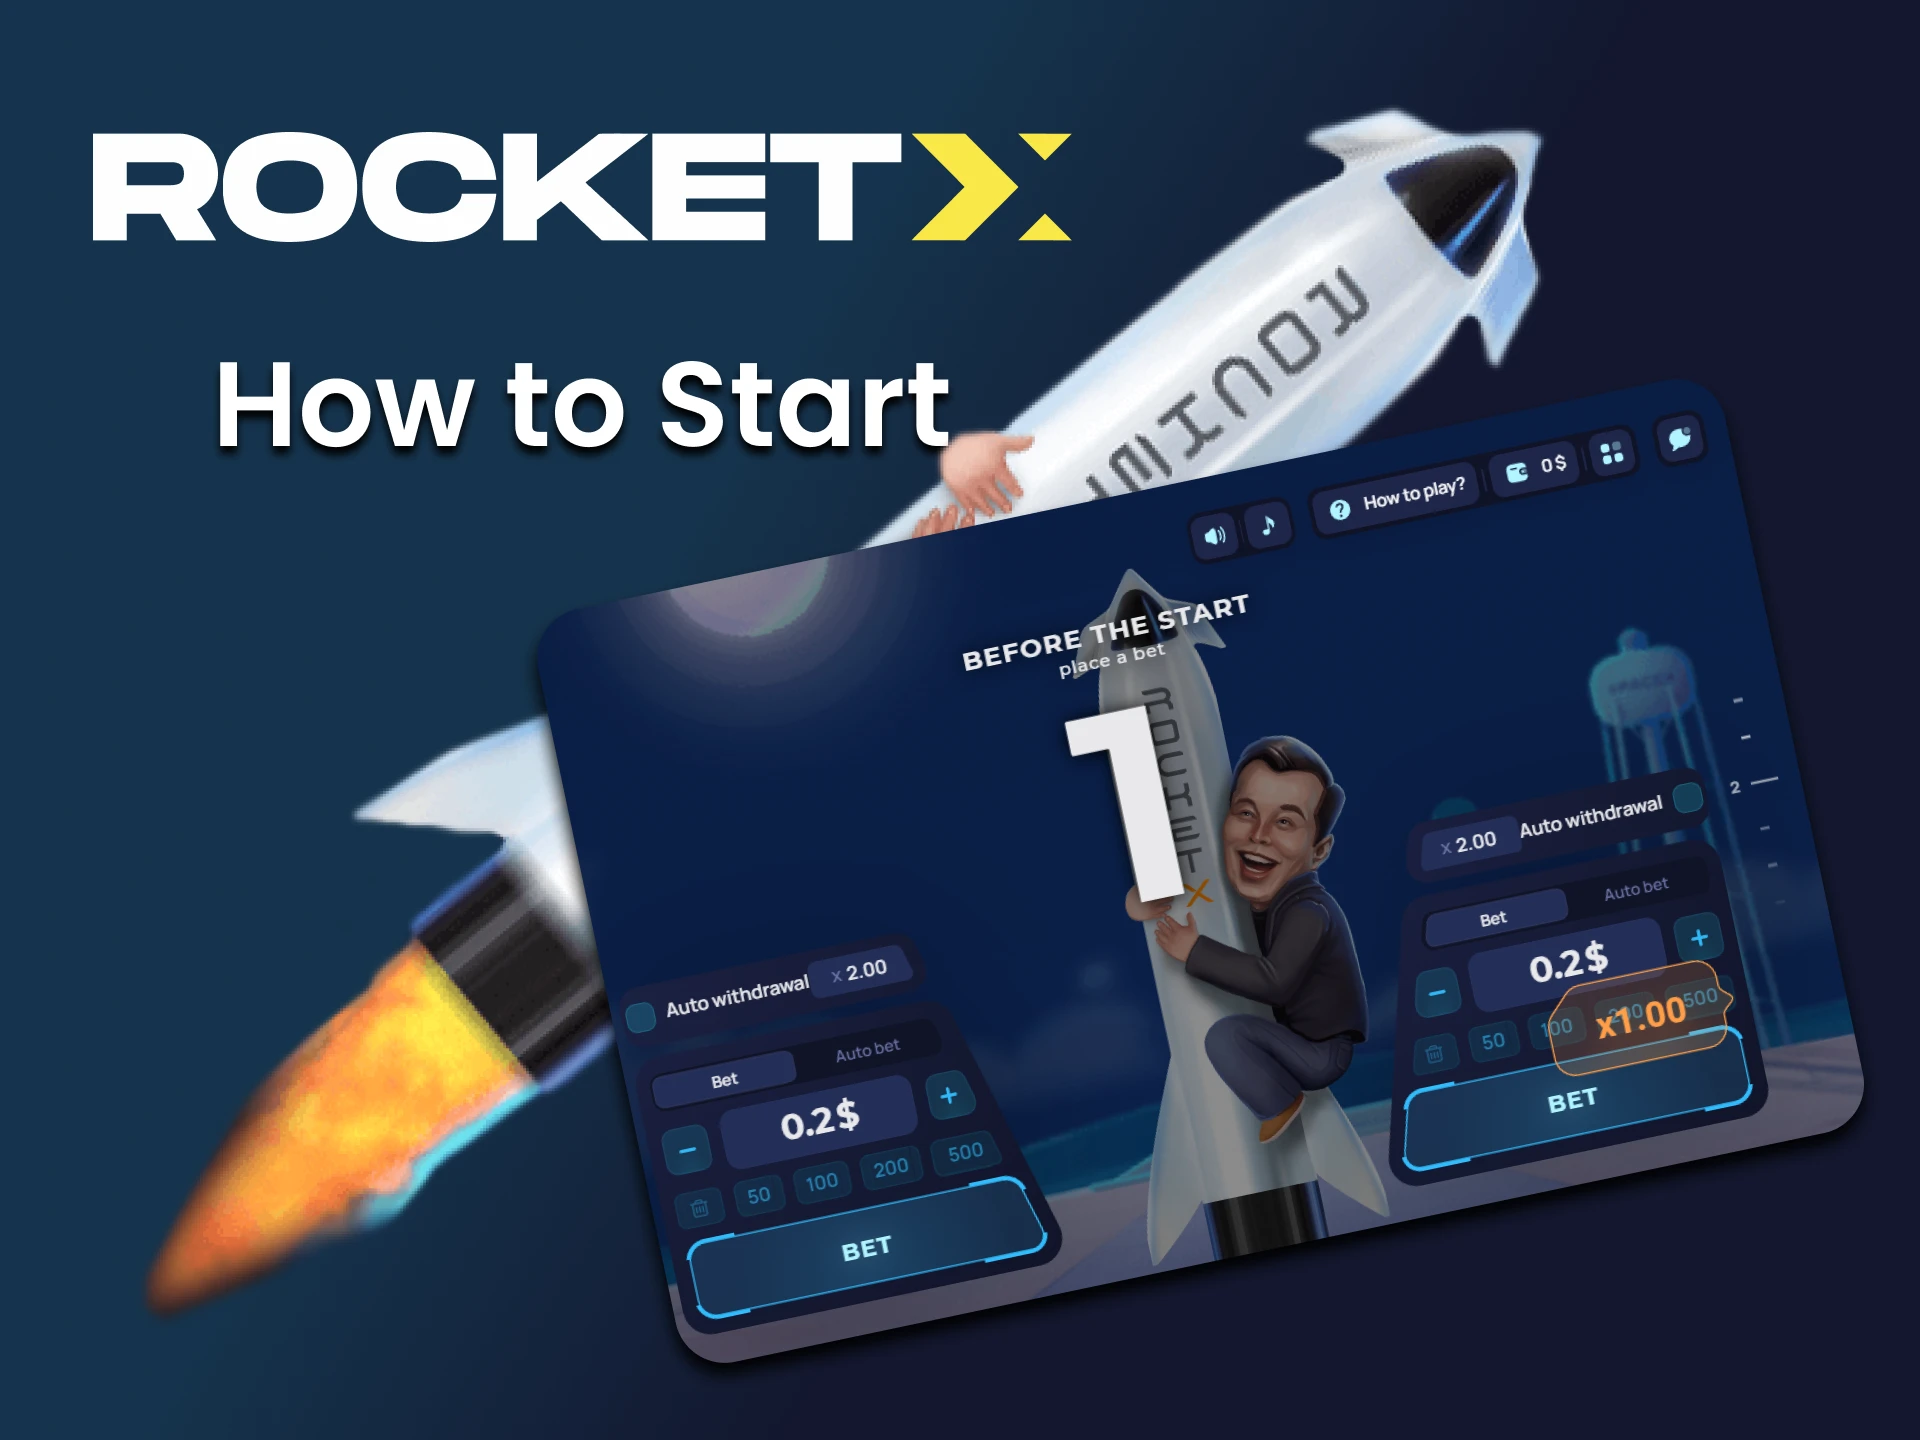 Choose a convenient service with the Rocket X game.